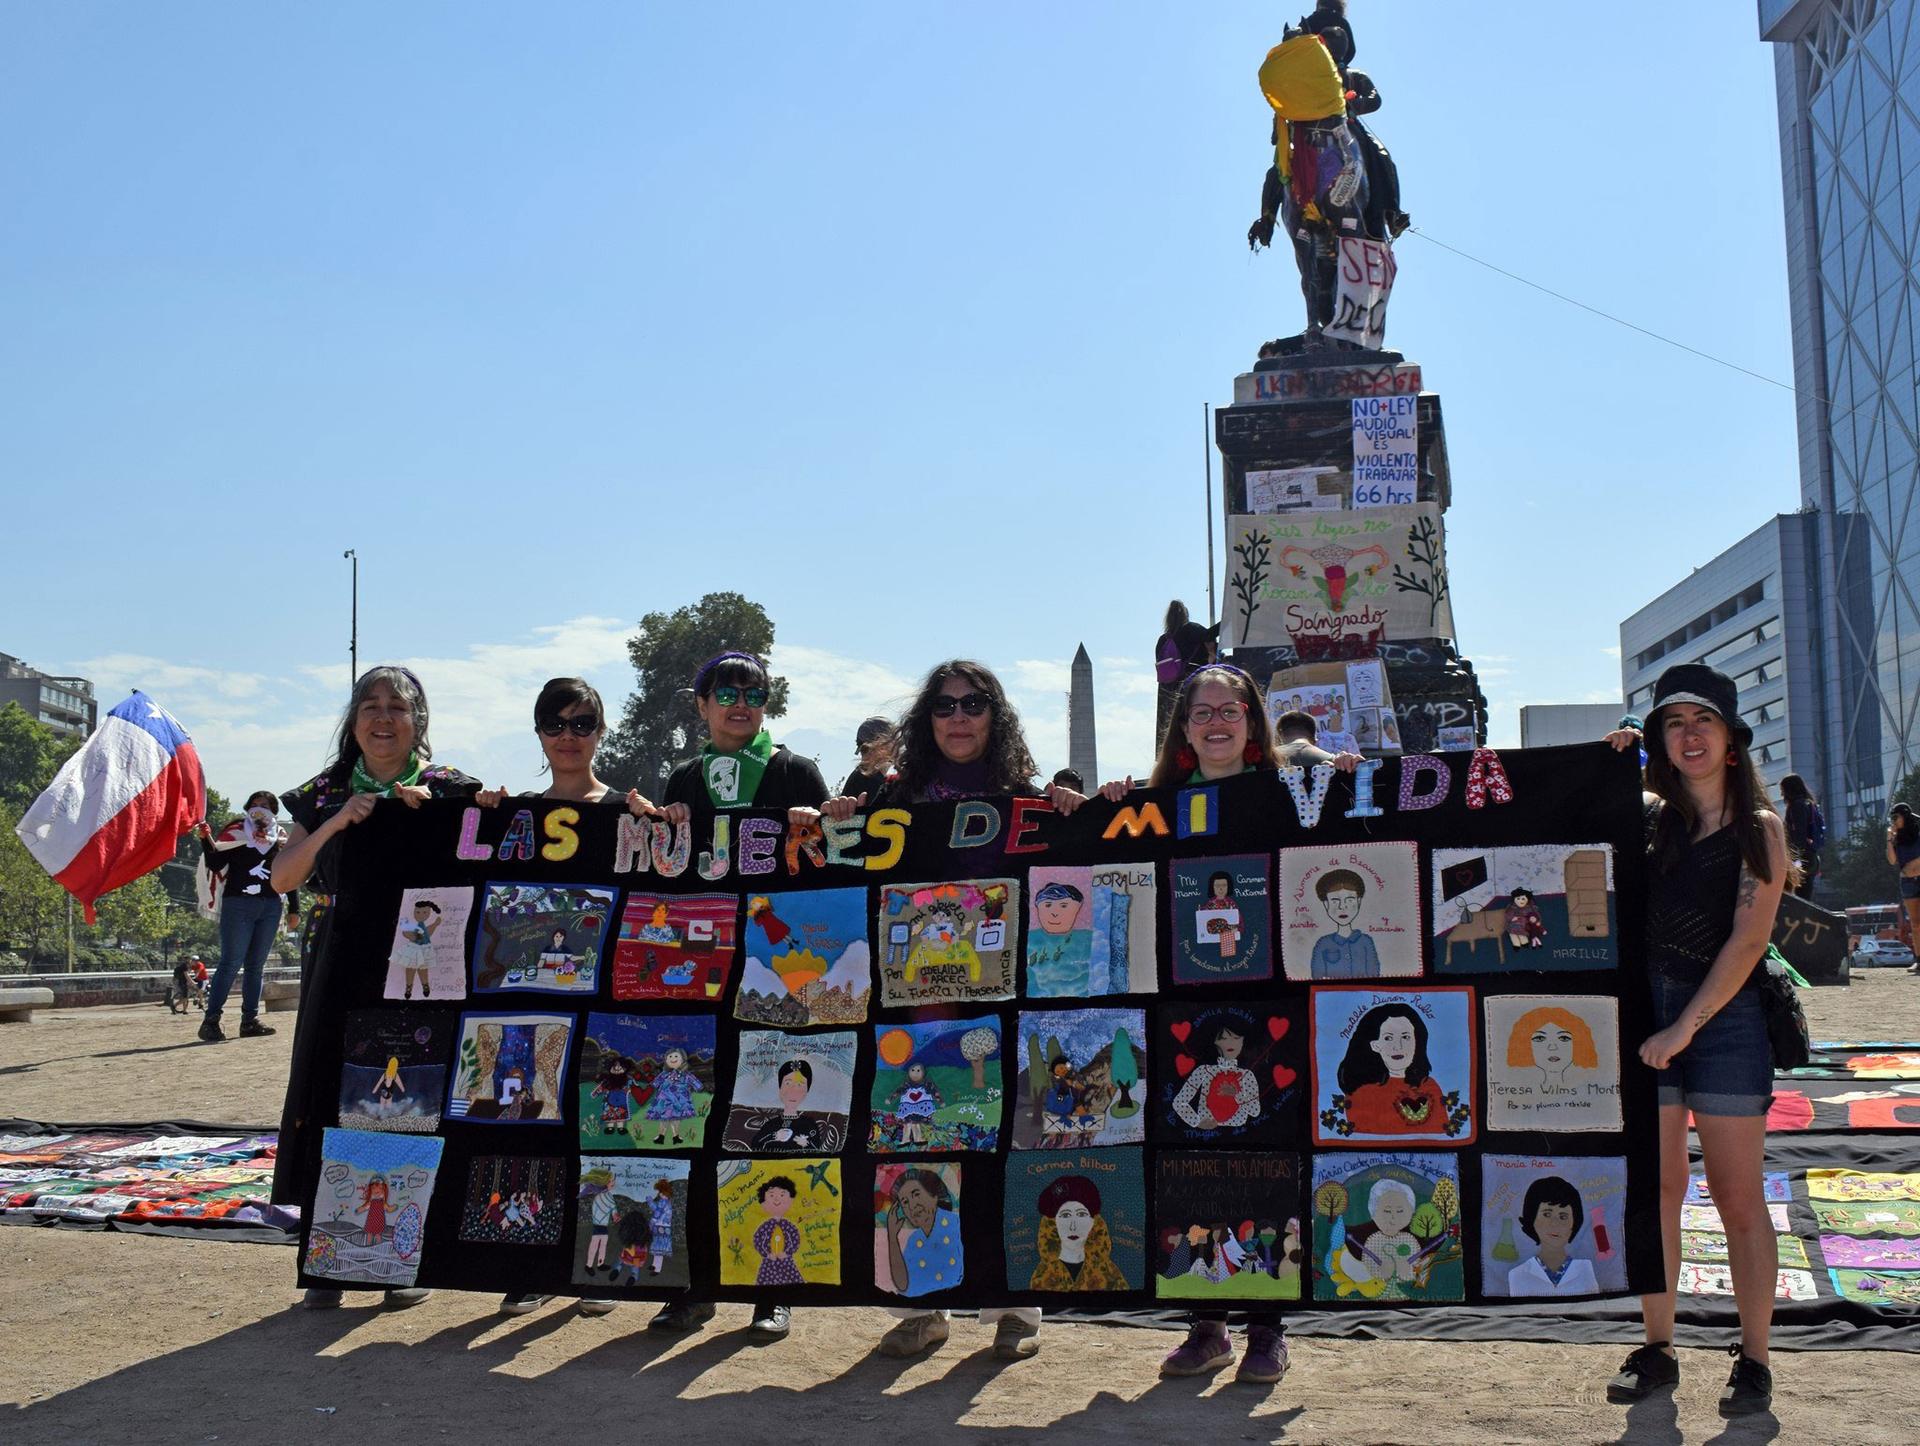 Several women are shown holding a tapestry with rows of embroidered blocks depicting slogans calling for legal abortion and an end to sexual assault.